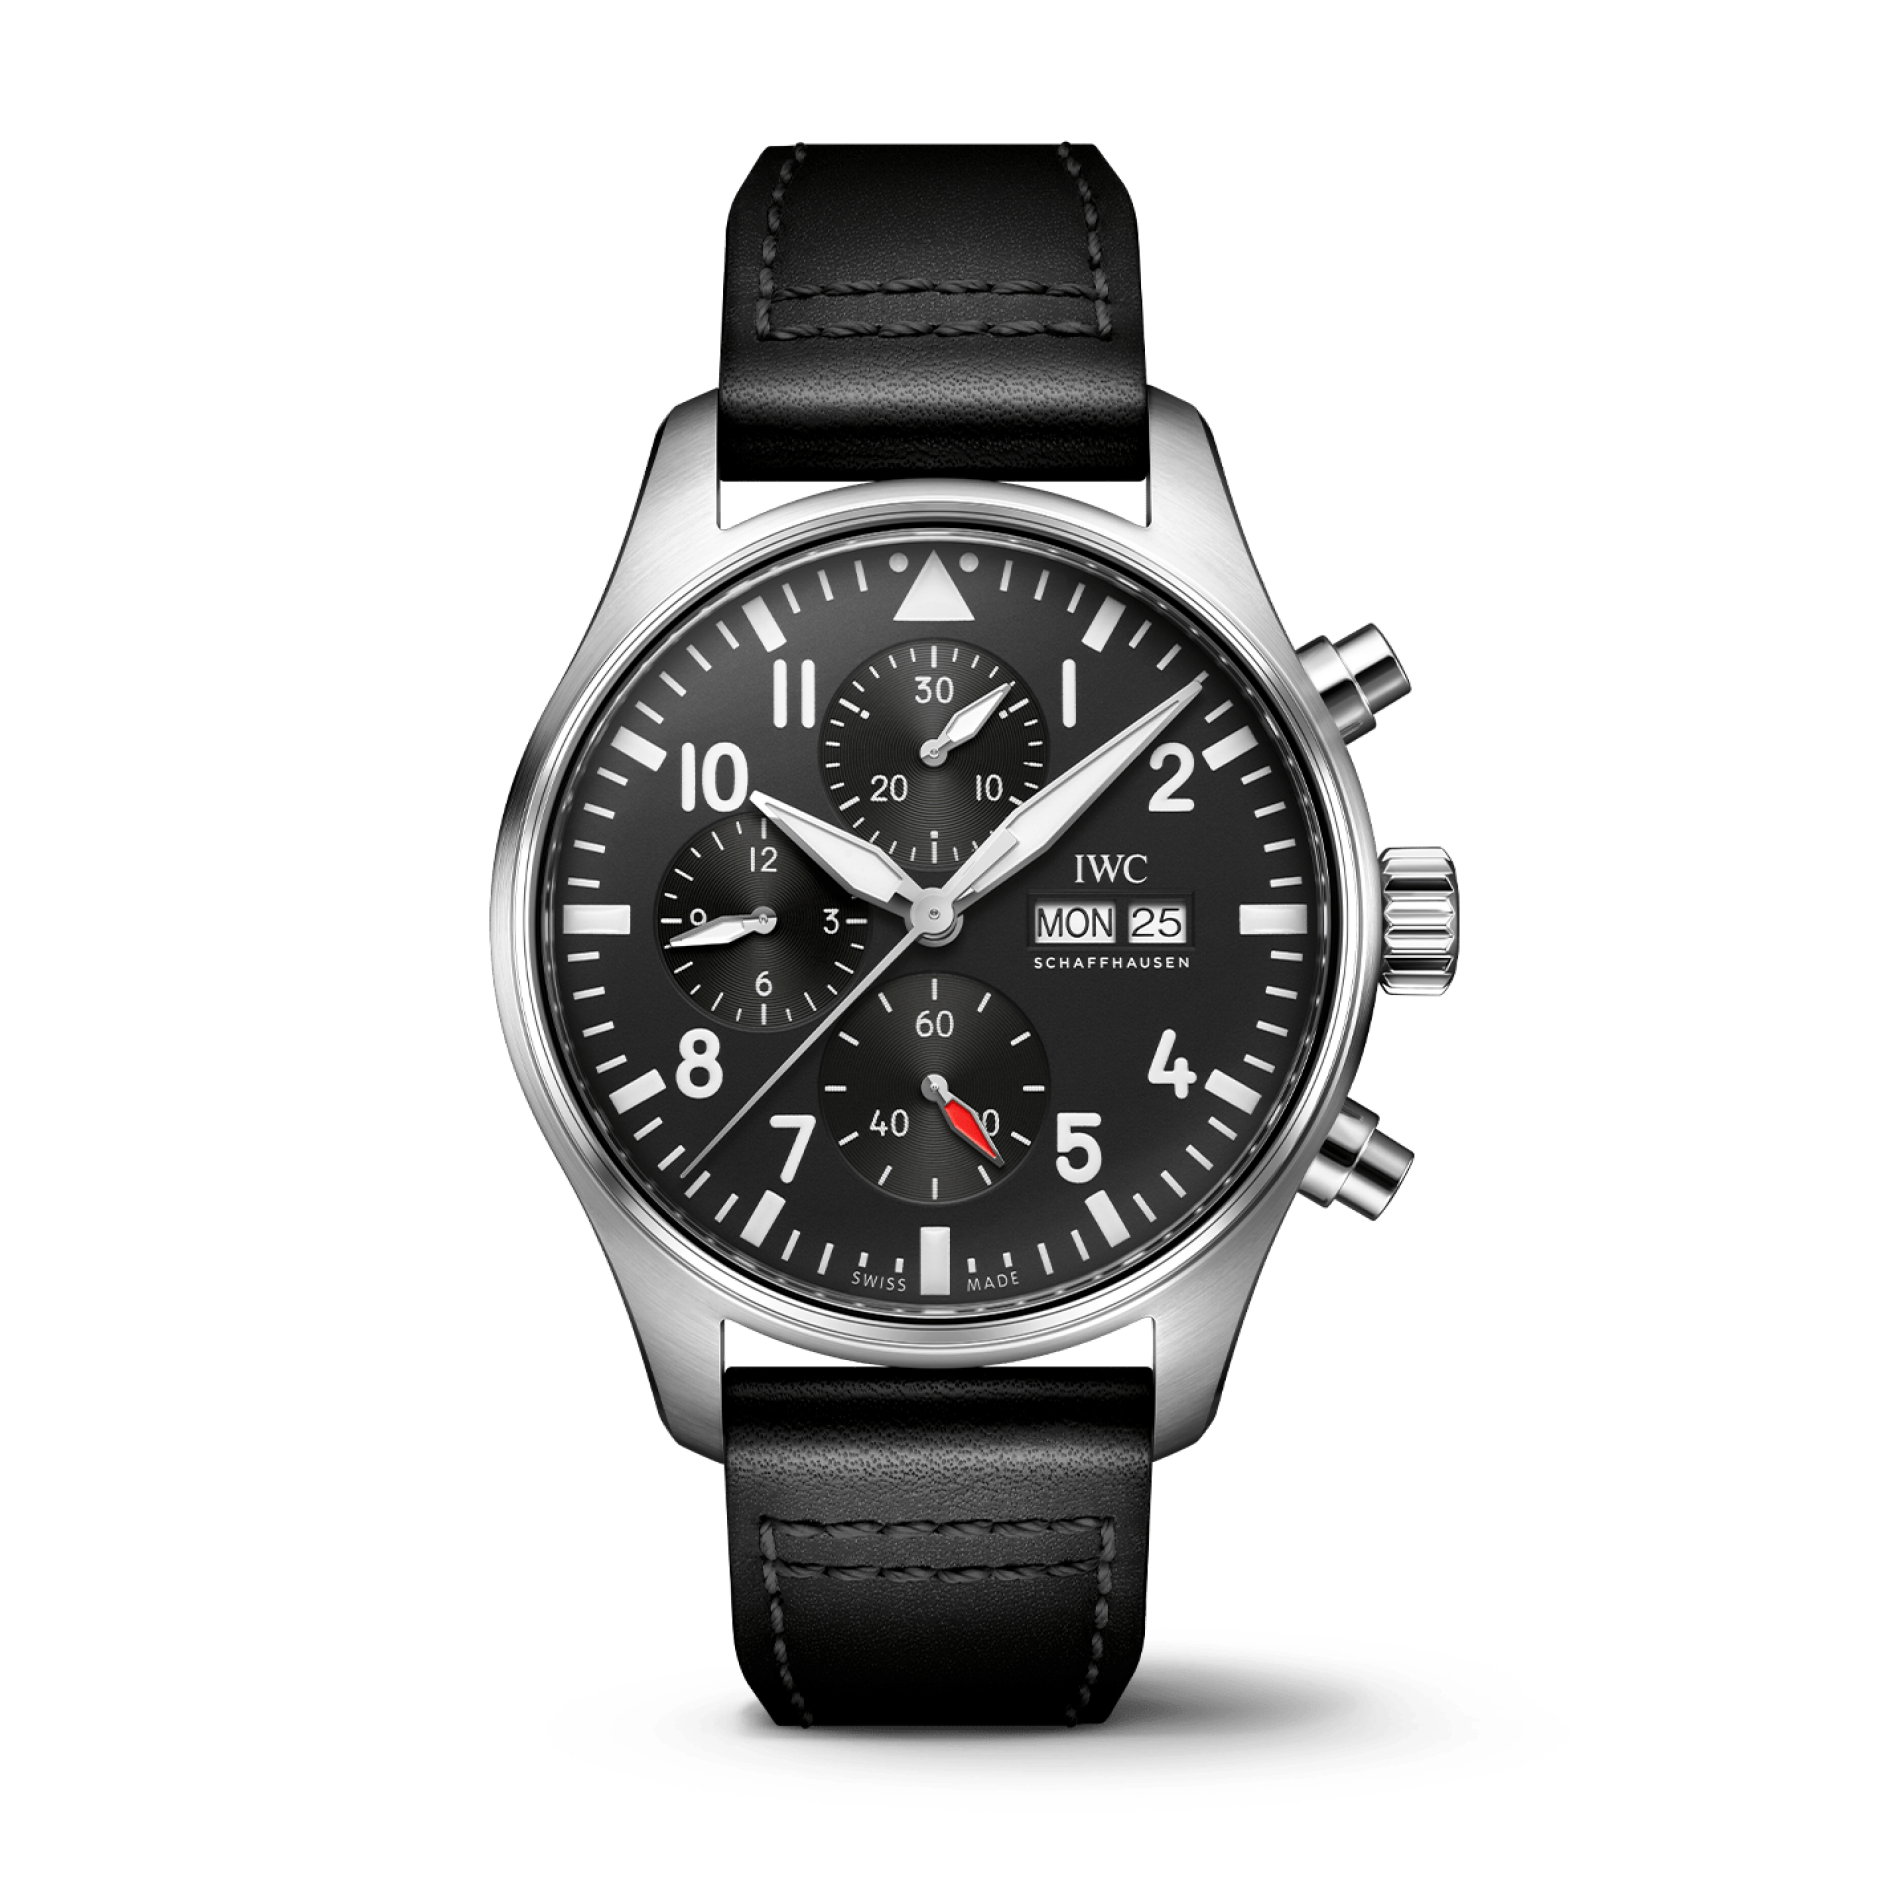 IWC PILOT’S AUTOMATIC 43 MM STAINLESS STEEL BLACK